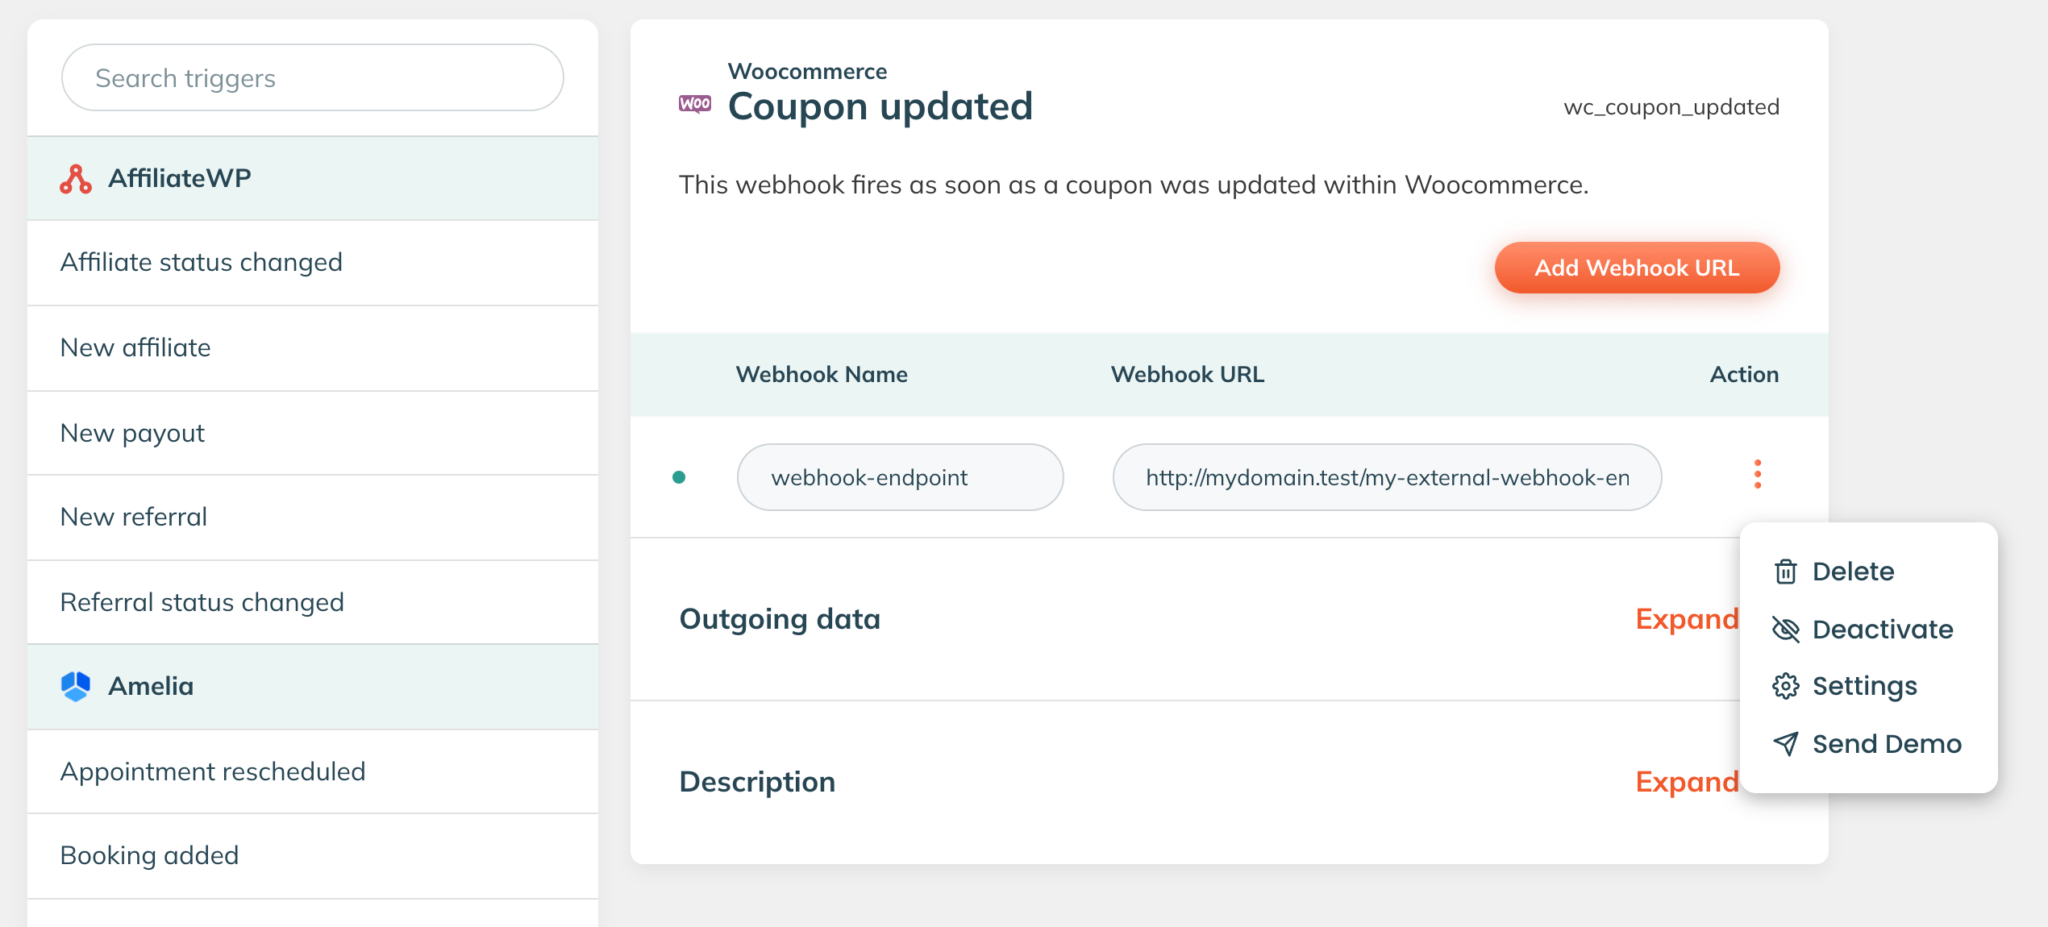 The WP Webhooks screen of the Shortcode updated trigger